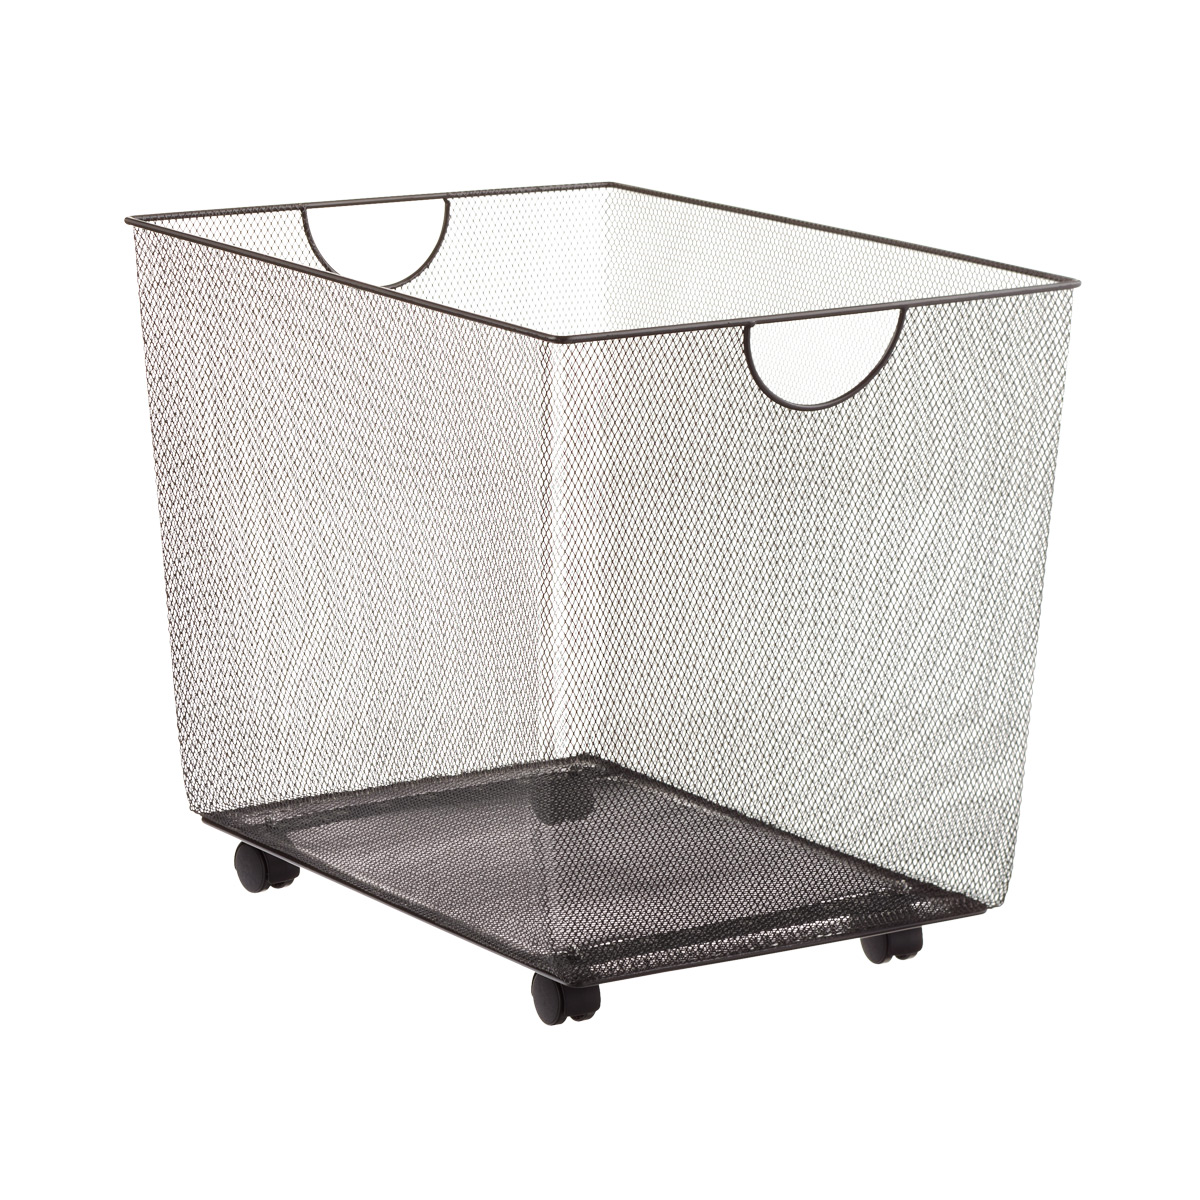 https://www.containerstore.com/catalogimages/476060/10090641-large-mesh-rolling-bin-grap.jpg